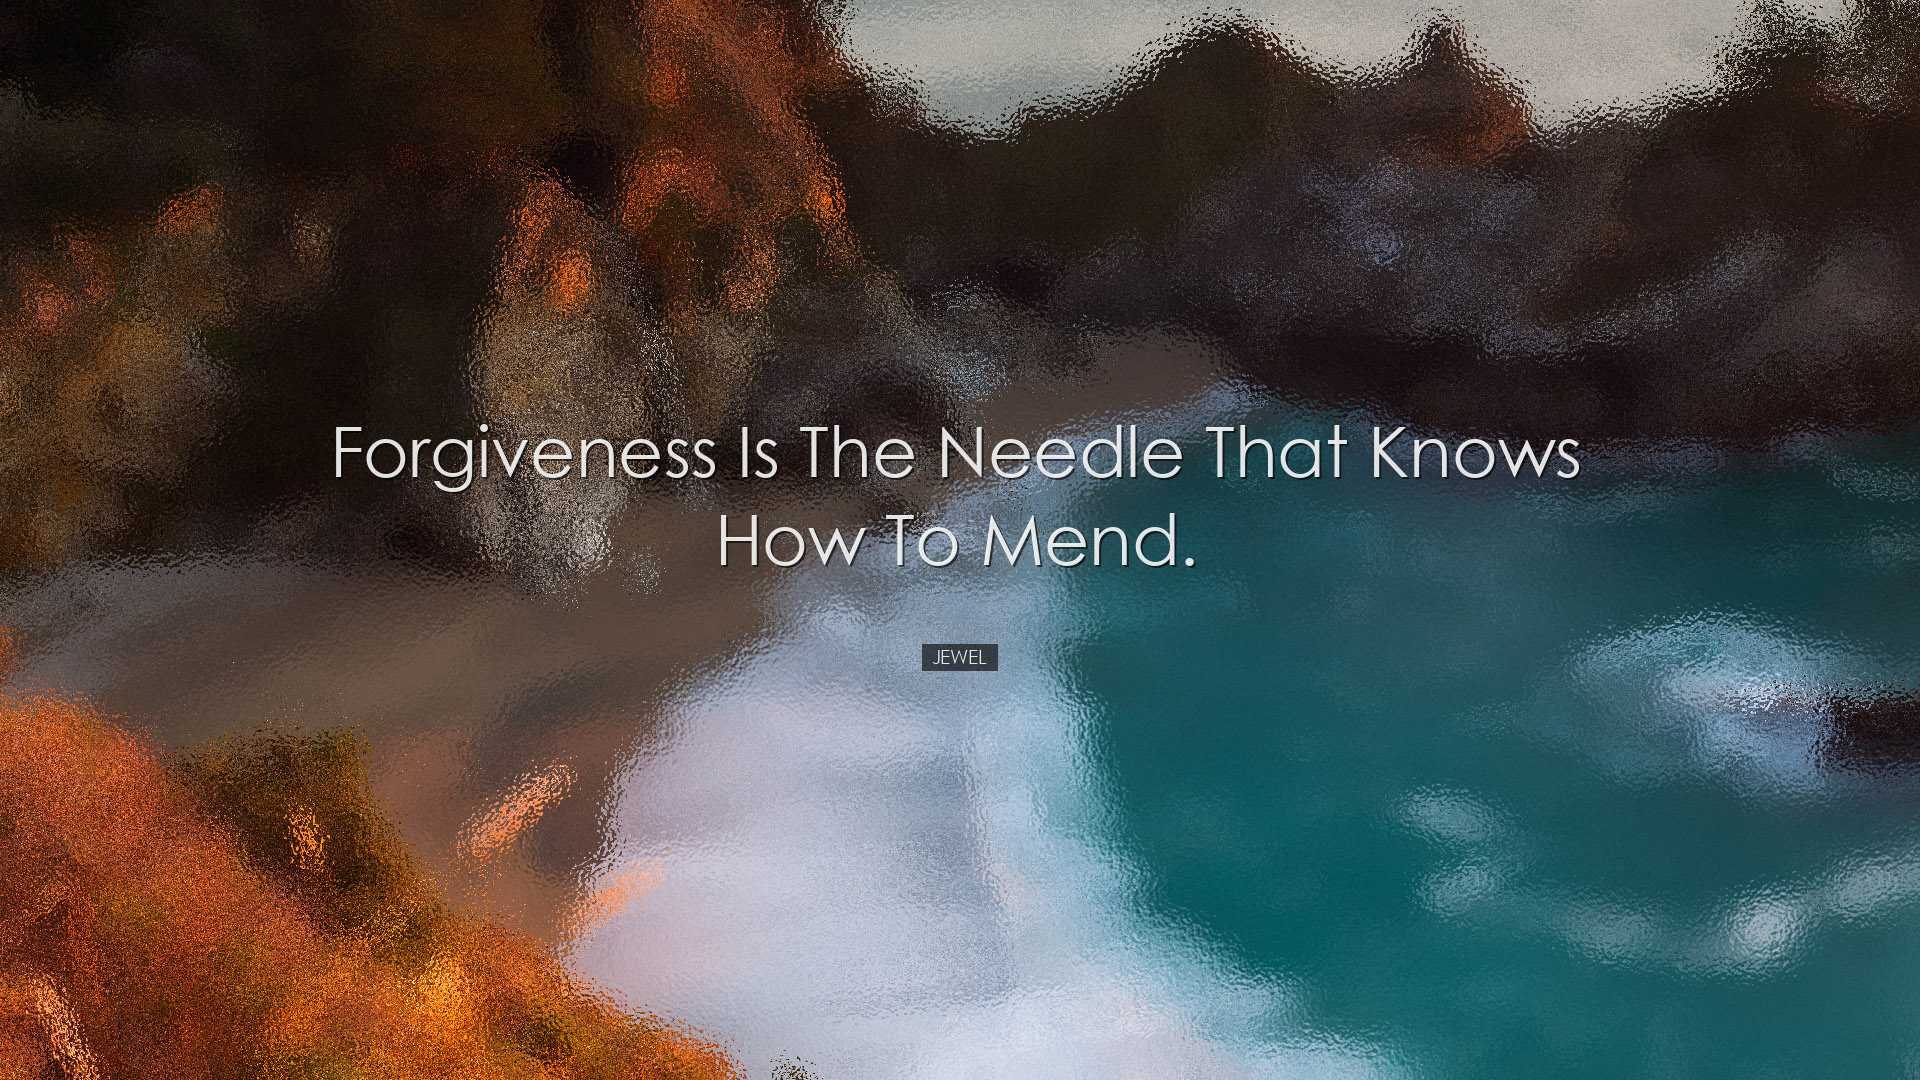 Forgiveness is the needle that knows how to mend. - Jewel